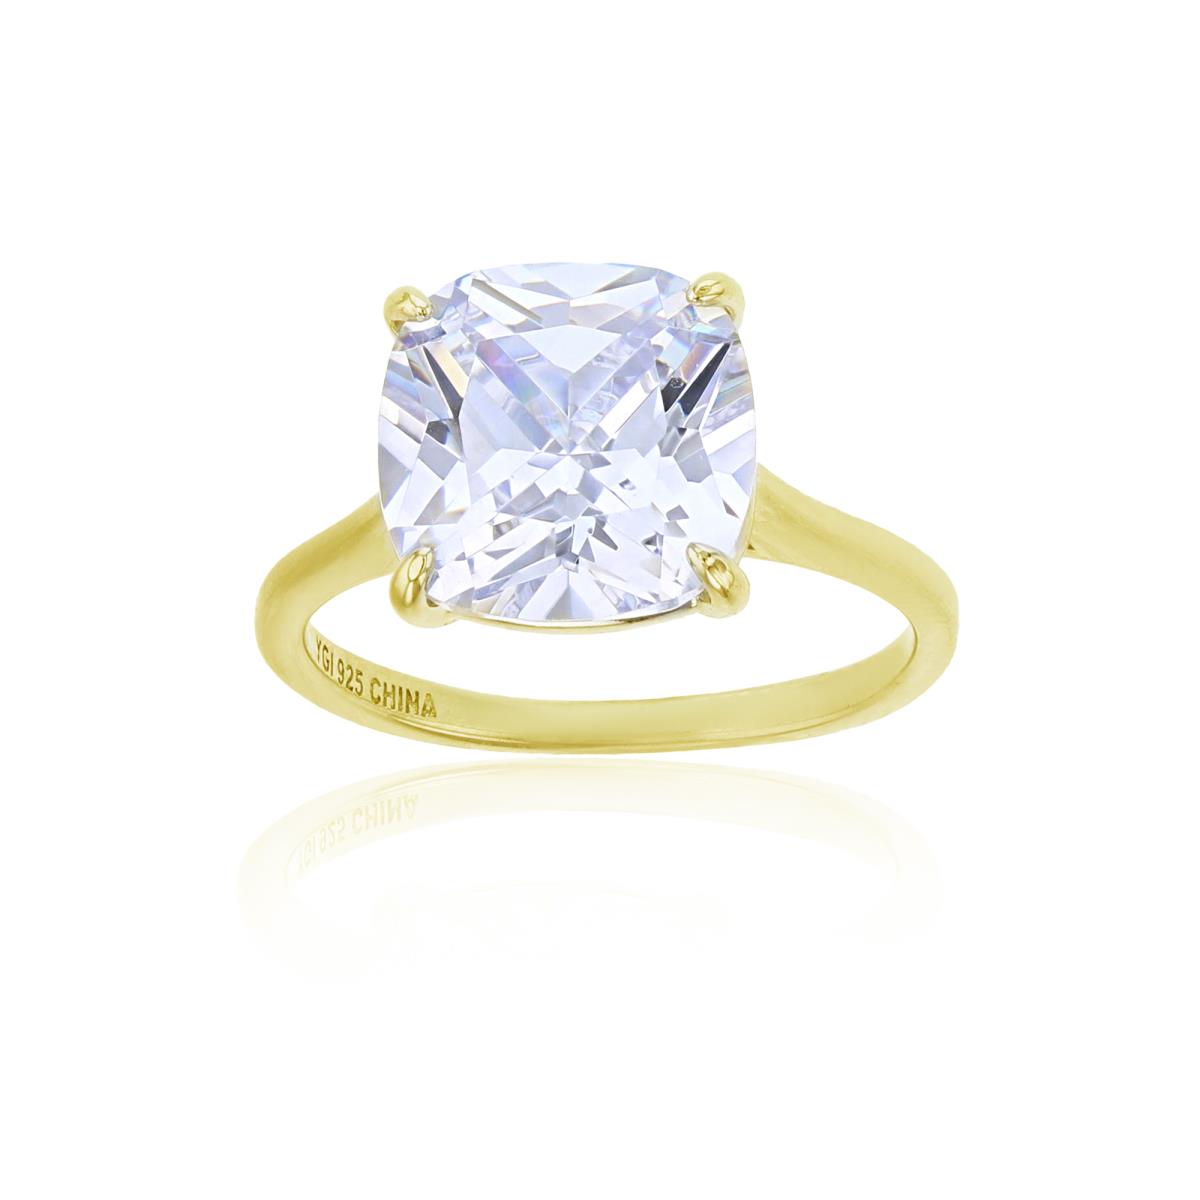 Sterling Silver Yellow 10mm Cushion Cut Solitaire Ring